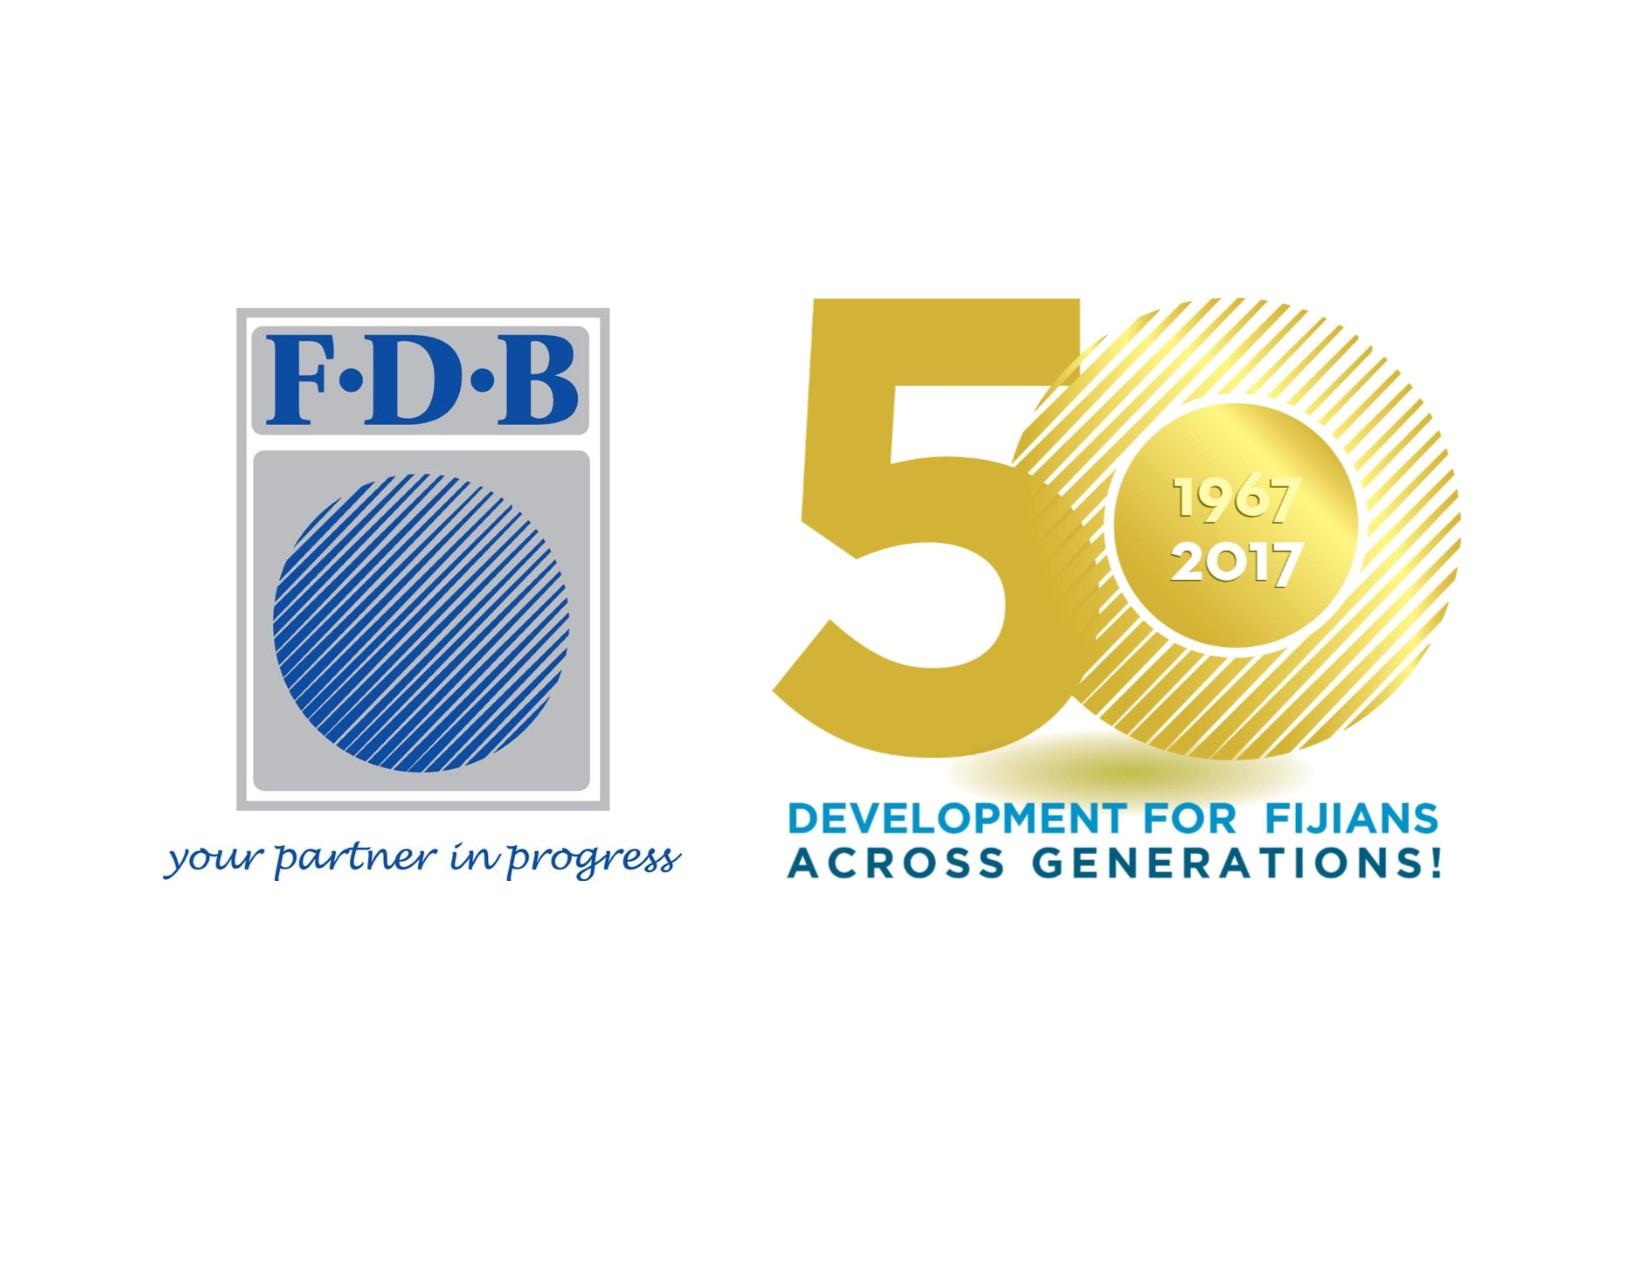 Fdb Logo - Chairperson, Mr. Robert G. Lyon Welcome Address at the Northern